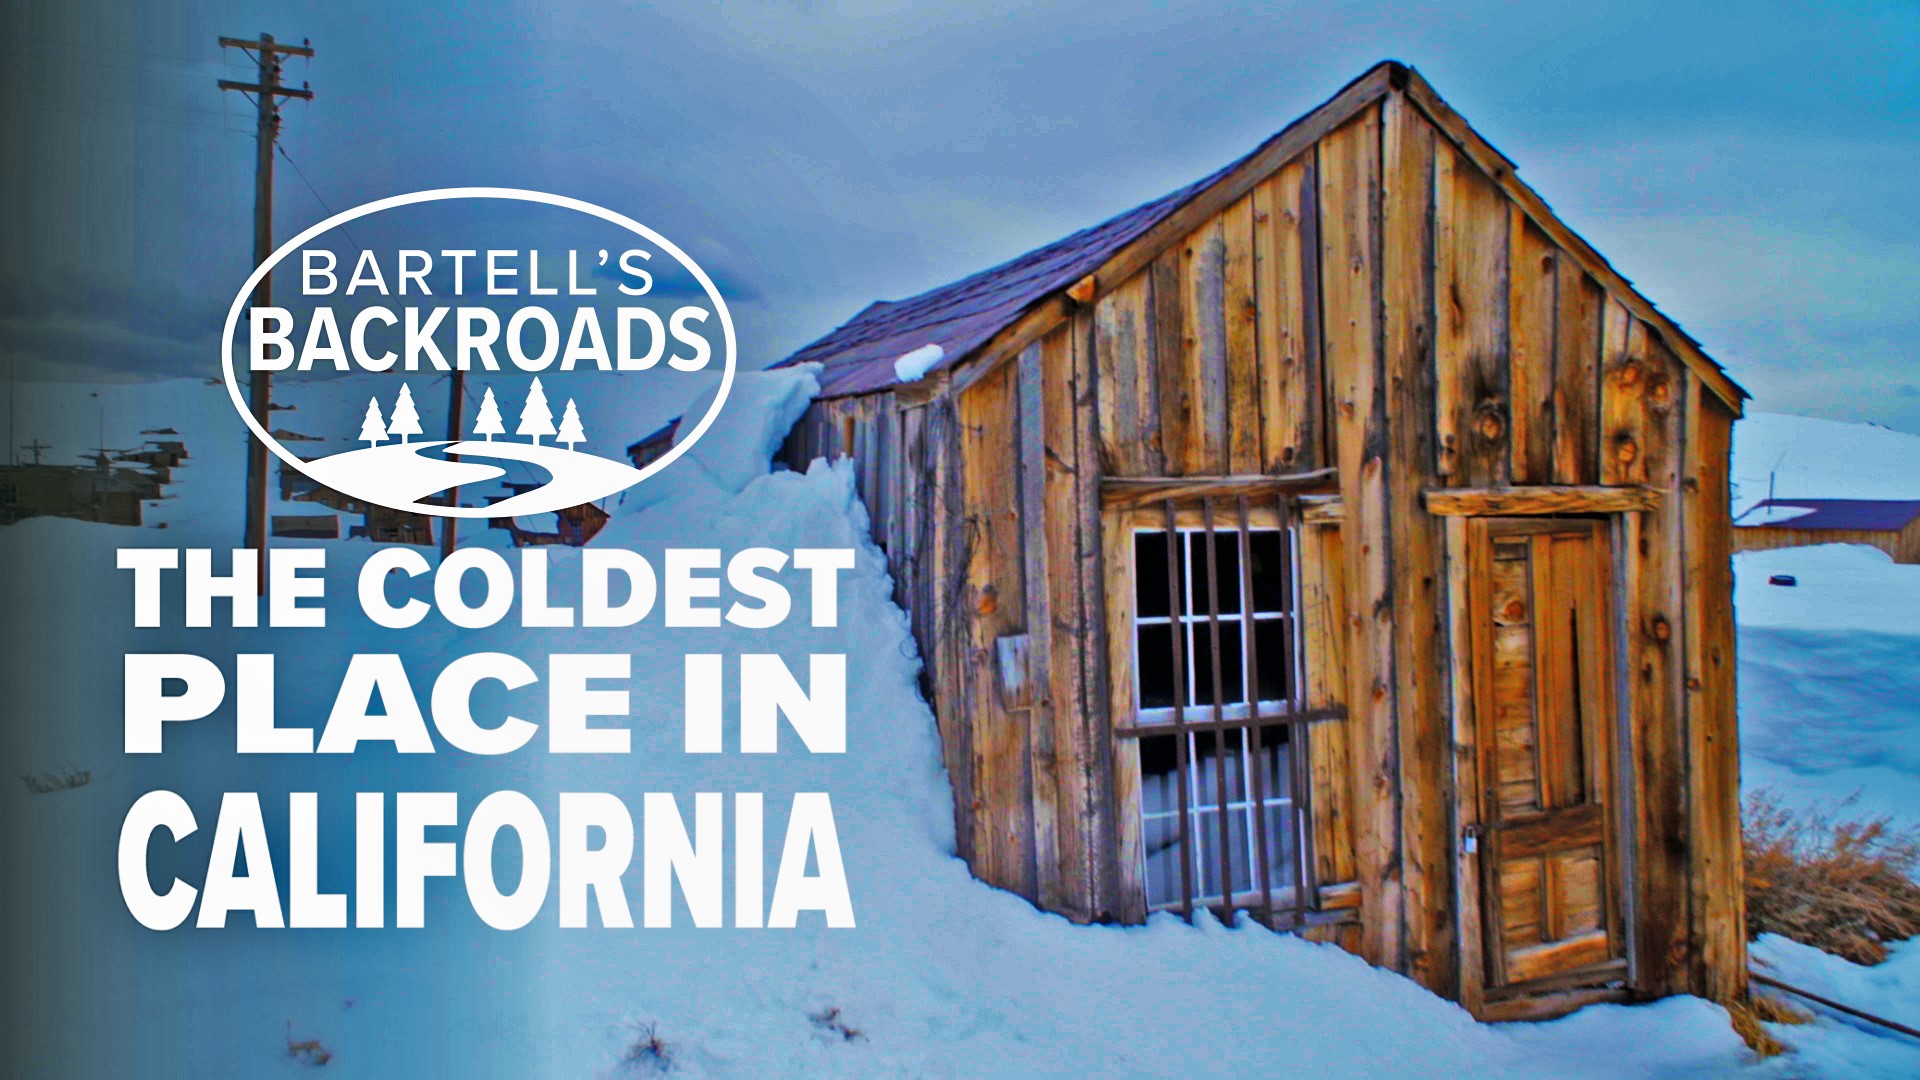 Bodie State Park used to be full of hopeful gold prospectors. This time of year, the only things you can hope to find there are miles of snow, and some of the coldest temperatures in the United States.